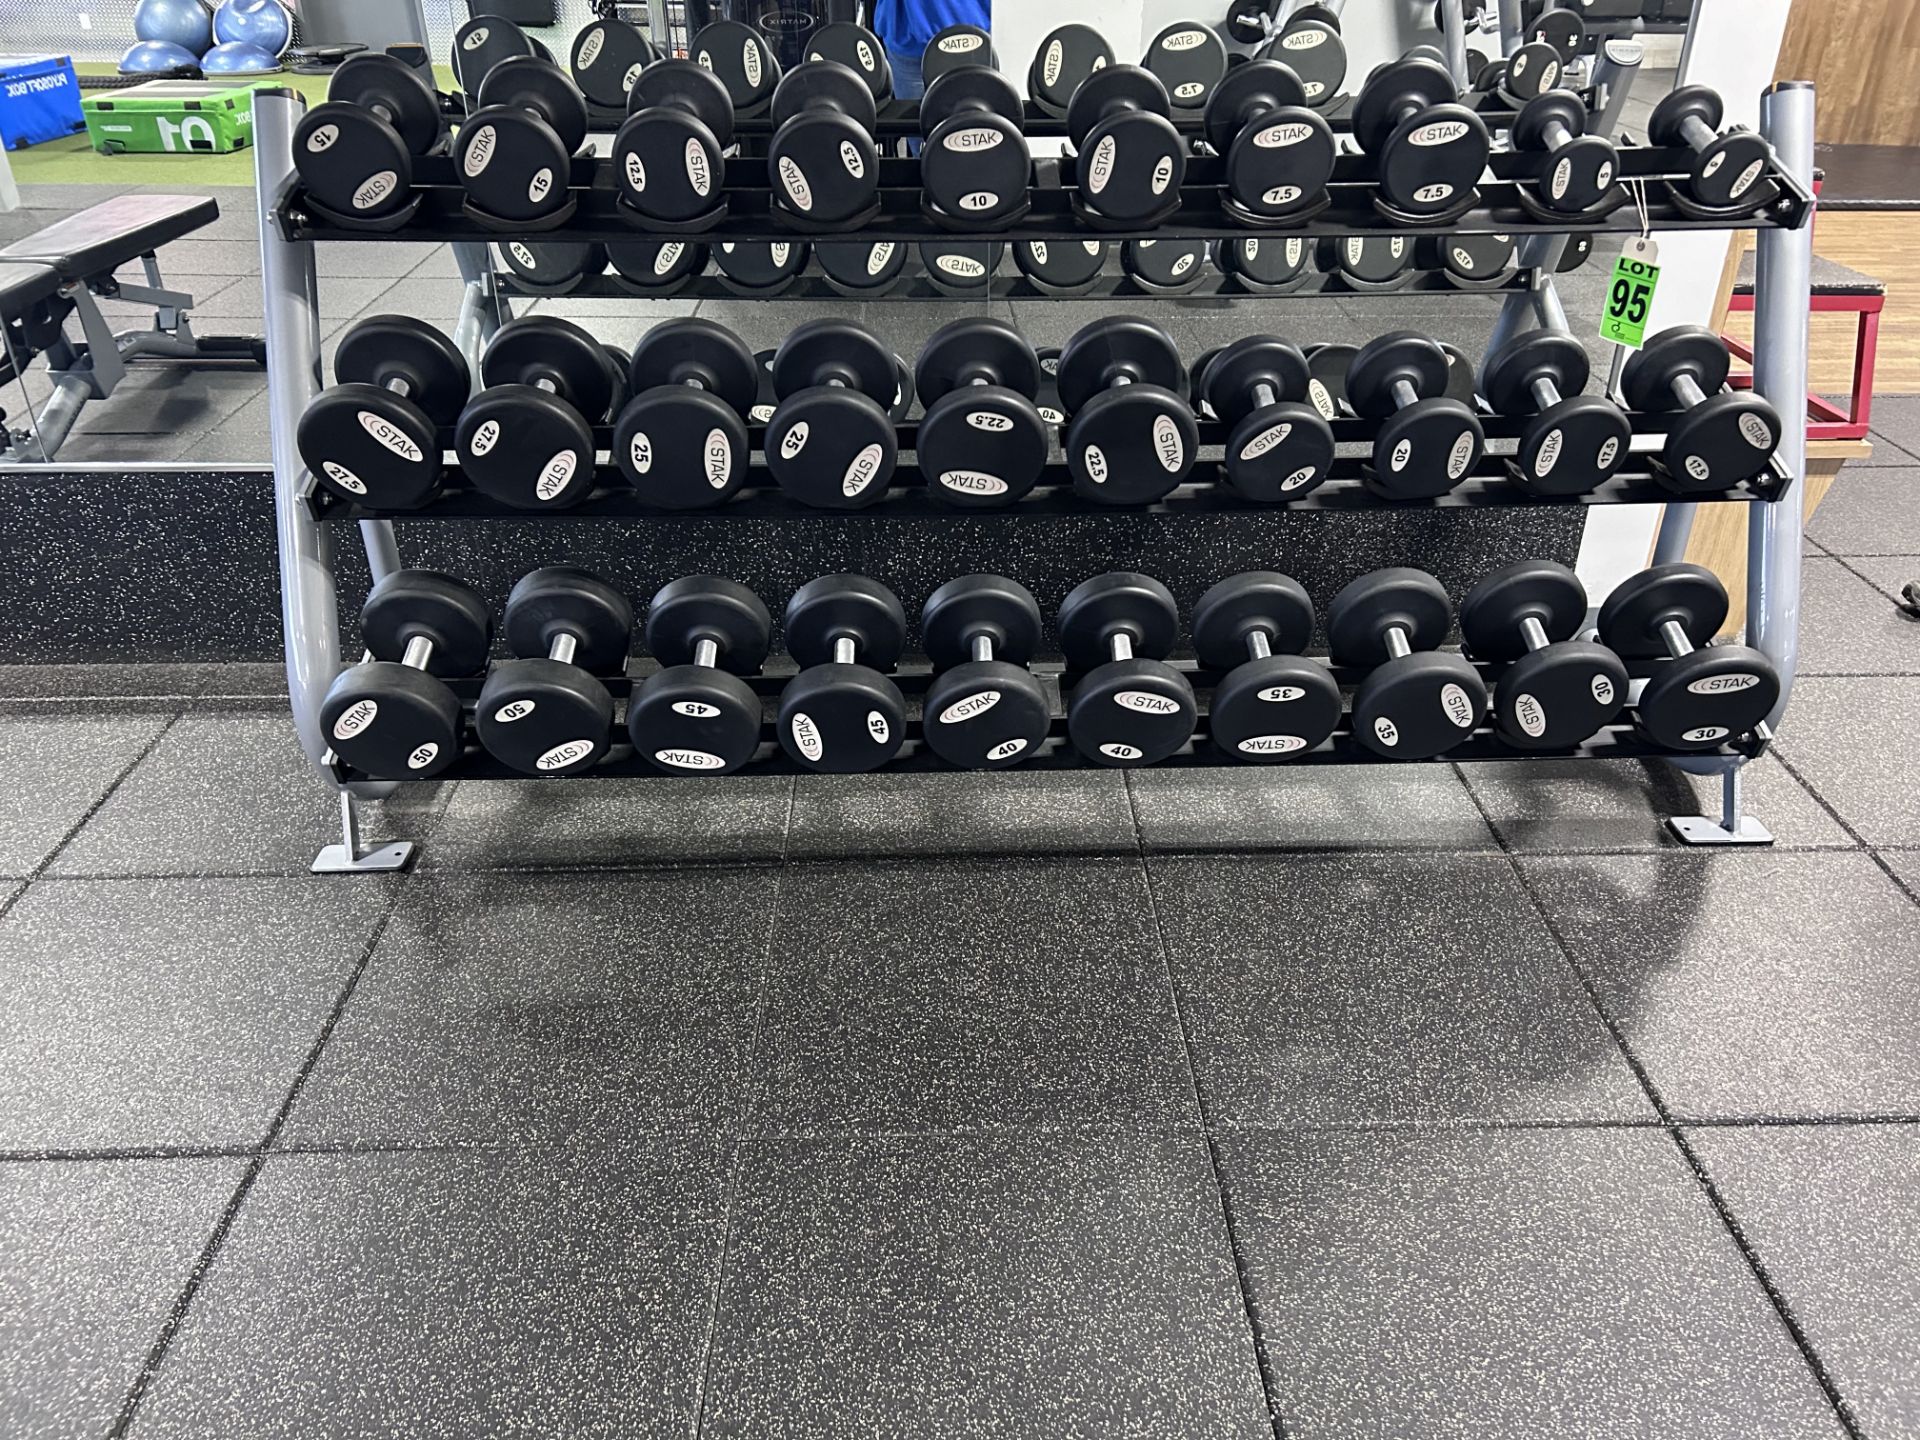 STAK Dumbells and Dumbell Rack. 15 Pairs, 725lbs total